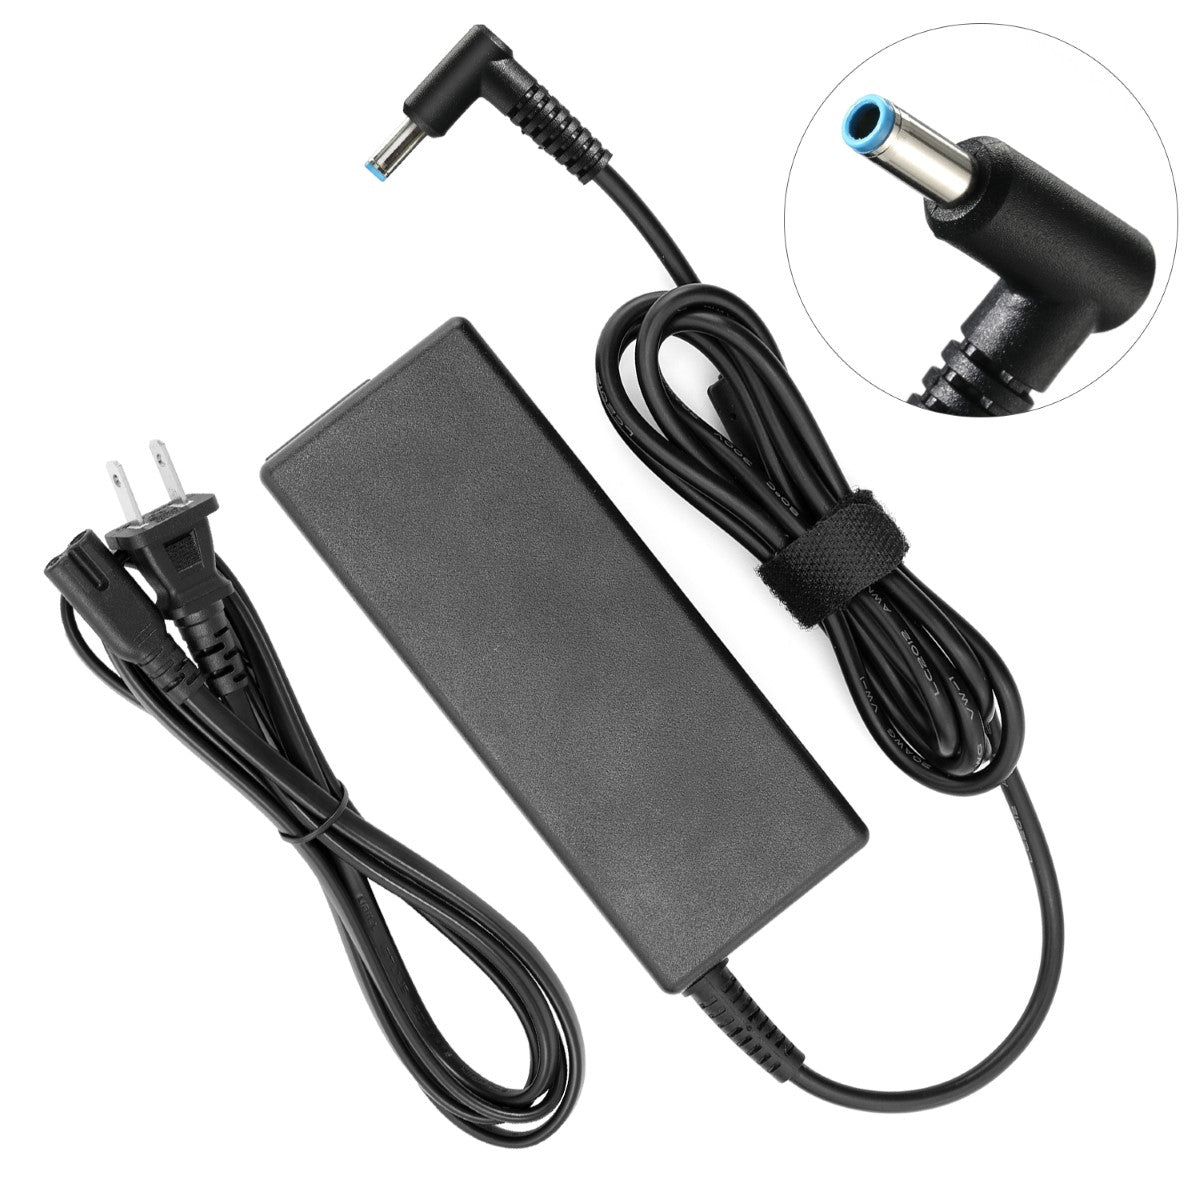 AC Adapter Charger for HP Pavilion Touchsmart 17-f022nr Notebook.